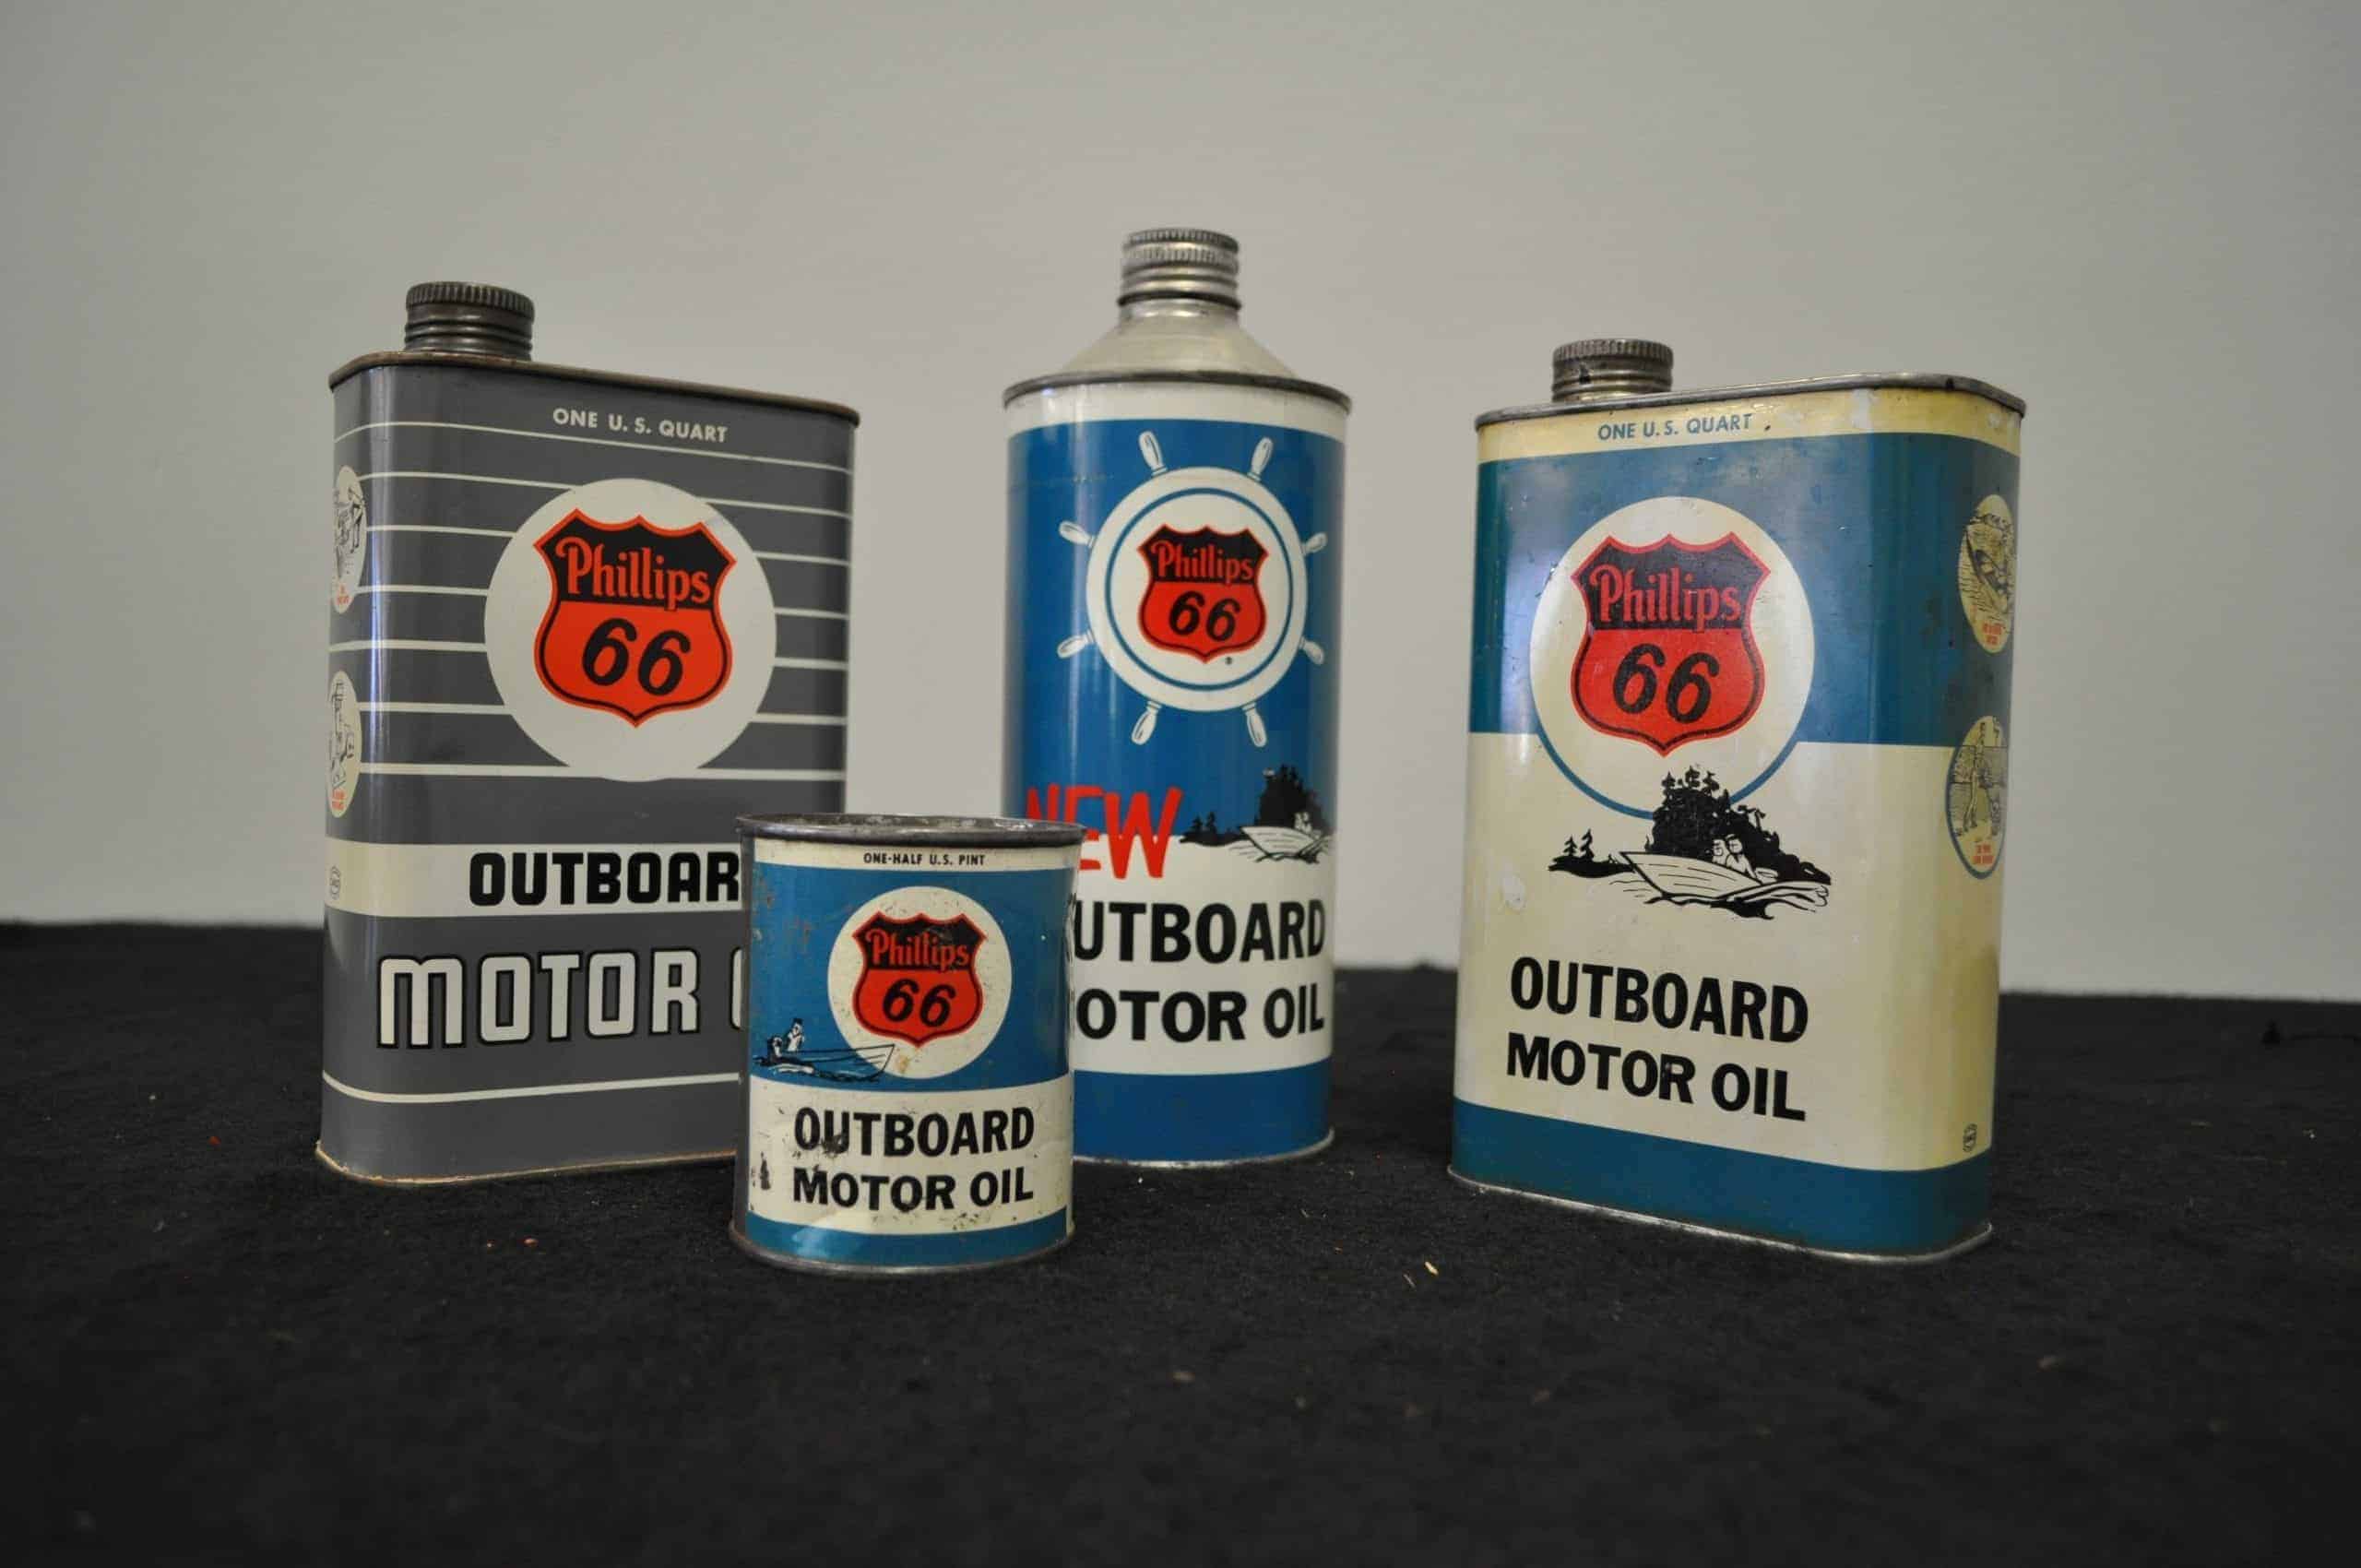 Philips 66 Outboard Oil Cans